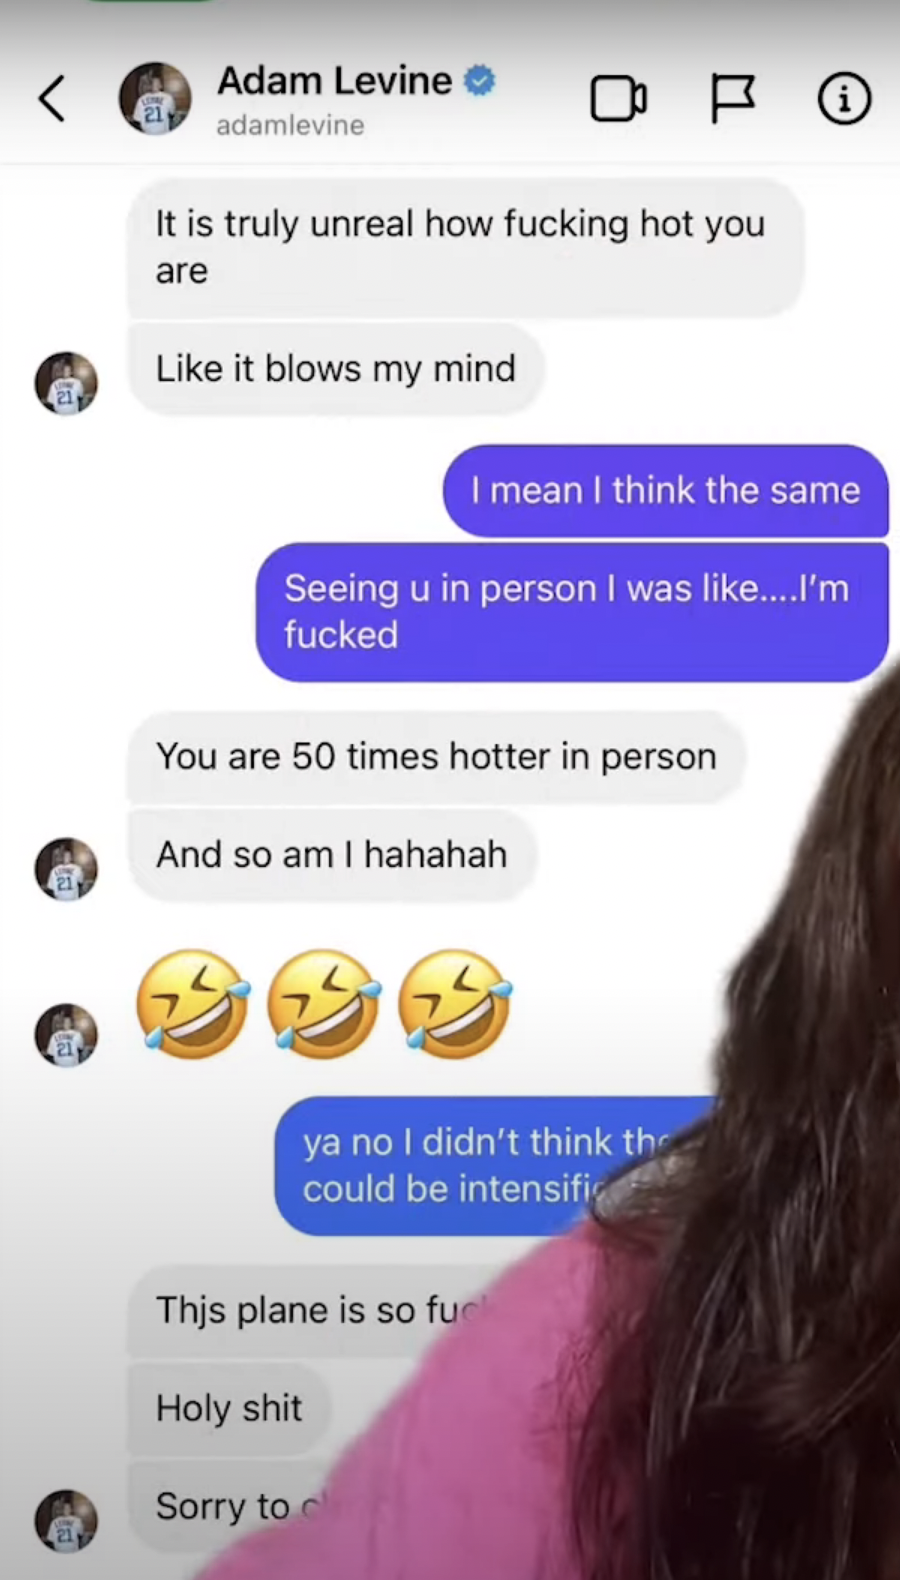 Sumner&#x27;s TikTok shows a DM conversation with Adam Levine in which he tells Sumner &quot;It&#x27;s truly unreal how fucking hot you are&quot; and that she&#x27;s 50 times hotter in person